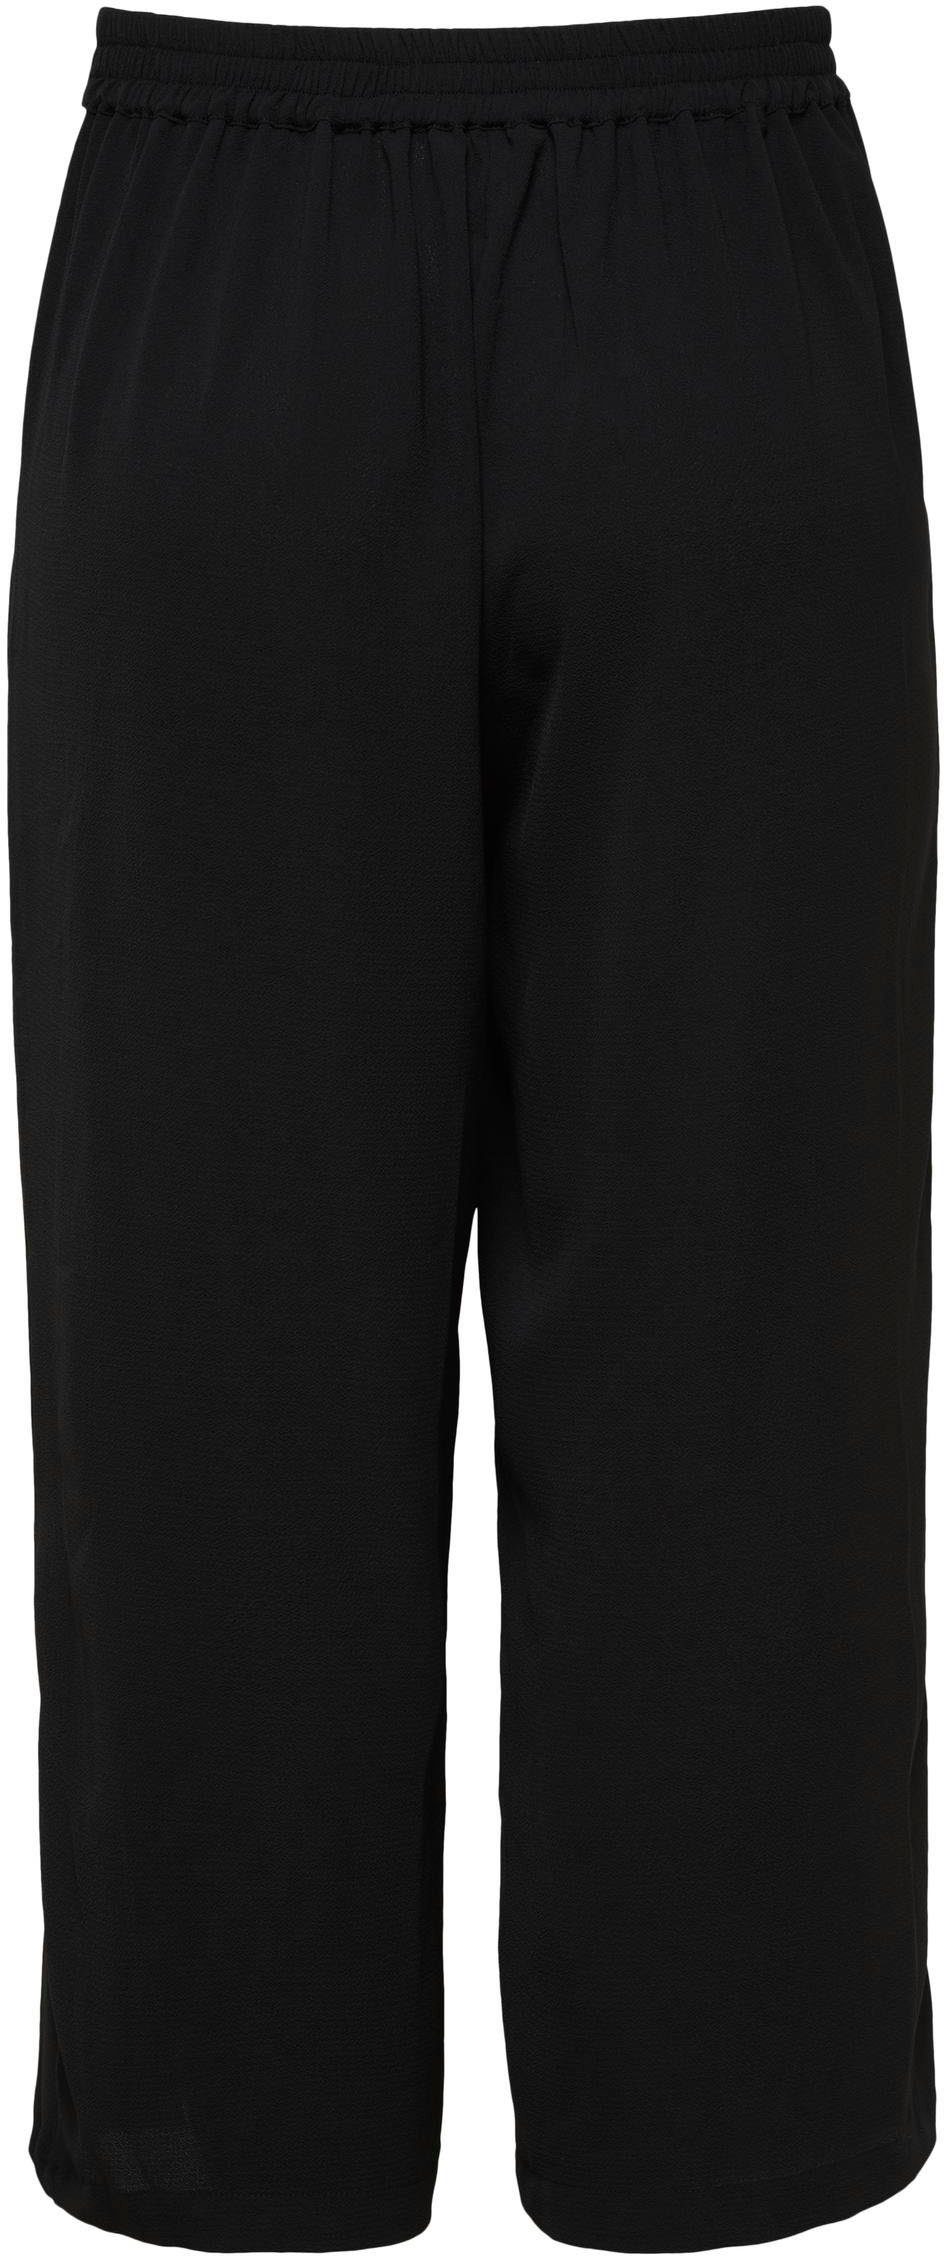 Black ONLWINNER uni PTM PANT CULOTTE Palazzohose ONLY oder PALAZZO in gestreiftem NOOS Design